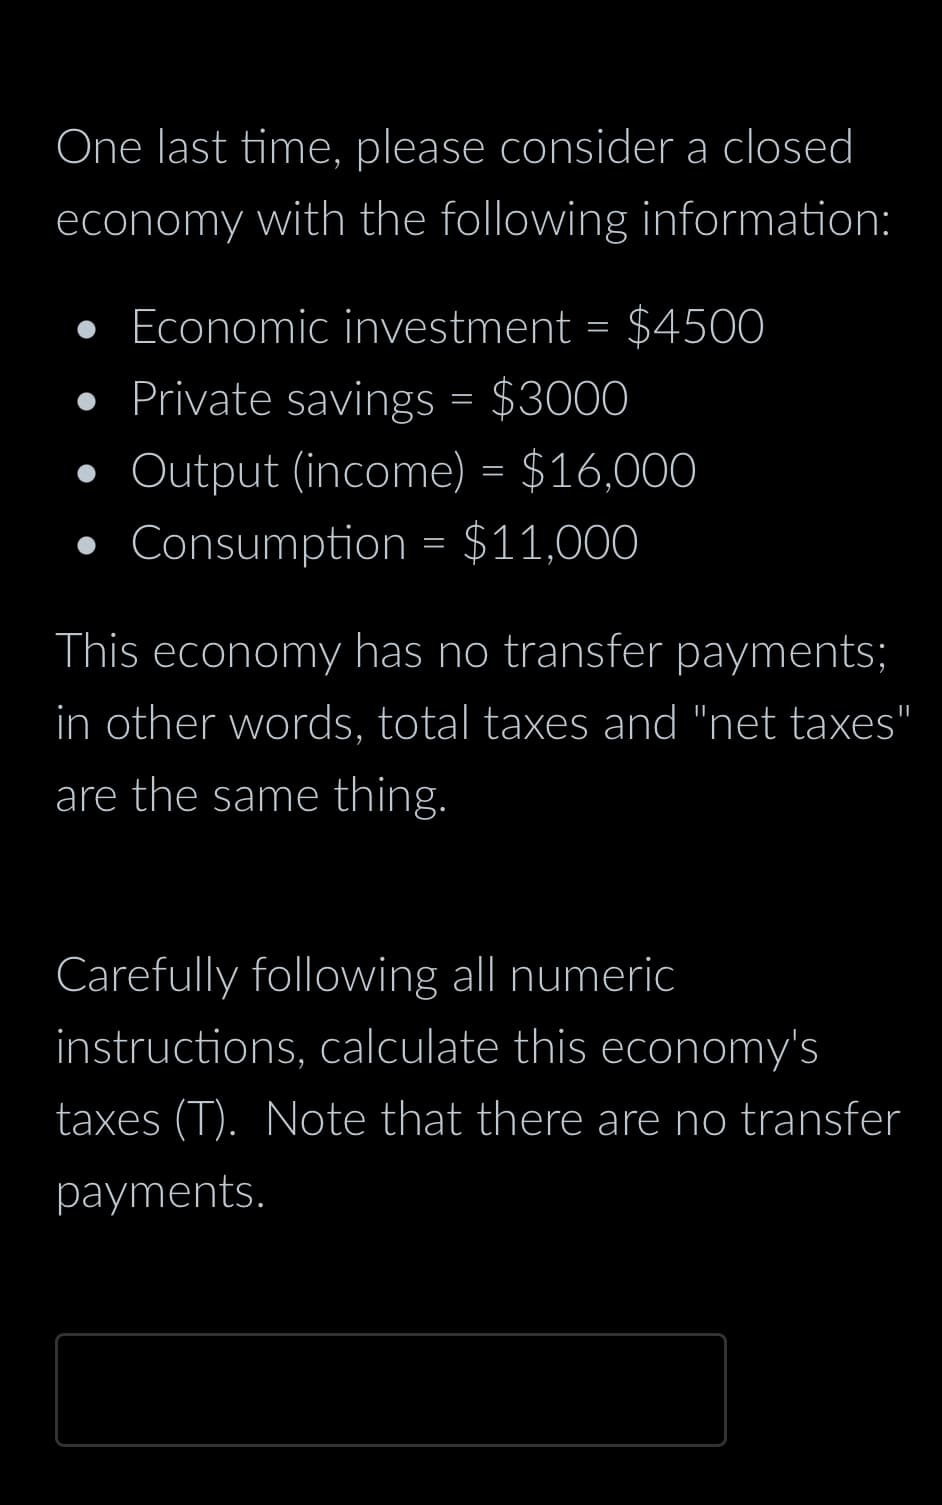 One last time, please consider a closed
economy with the following information:
• Economic investment = $4500
• Private savings = $3000
Output (income) = $16,000
Consumption = $11,000
This economy has no transfer payments;
in other words, total taxes and "net taxes"
are the same thing.
Carefully following all numeric
instructions, calculate this economy's
taxes (T). Note that there are no transfer
payments.